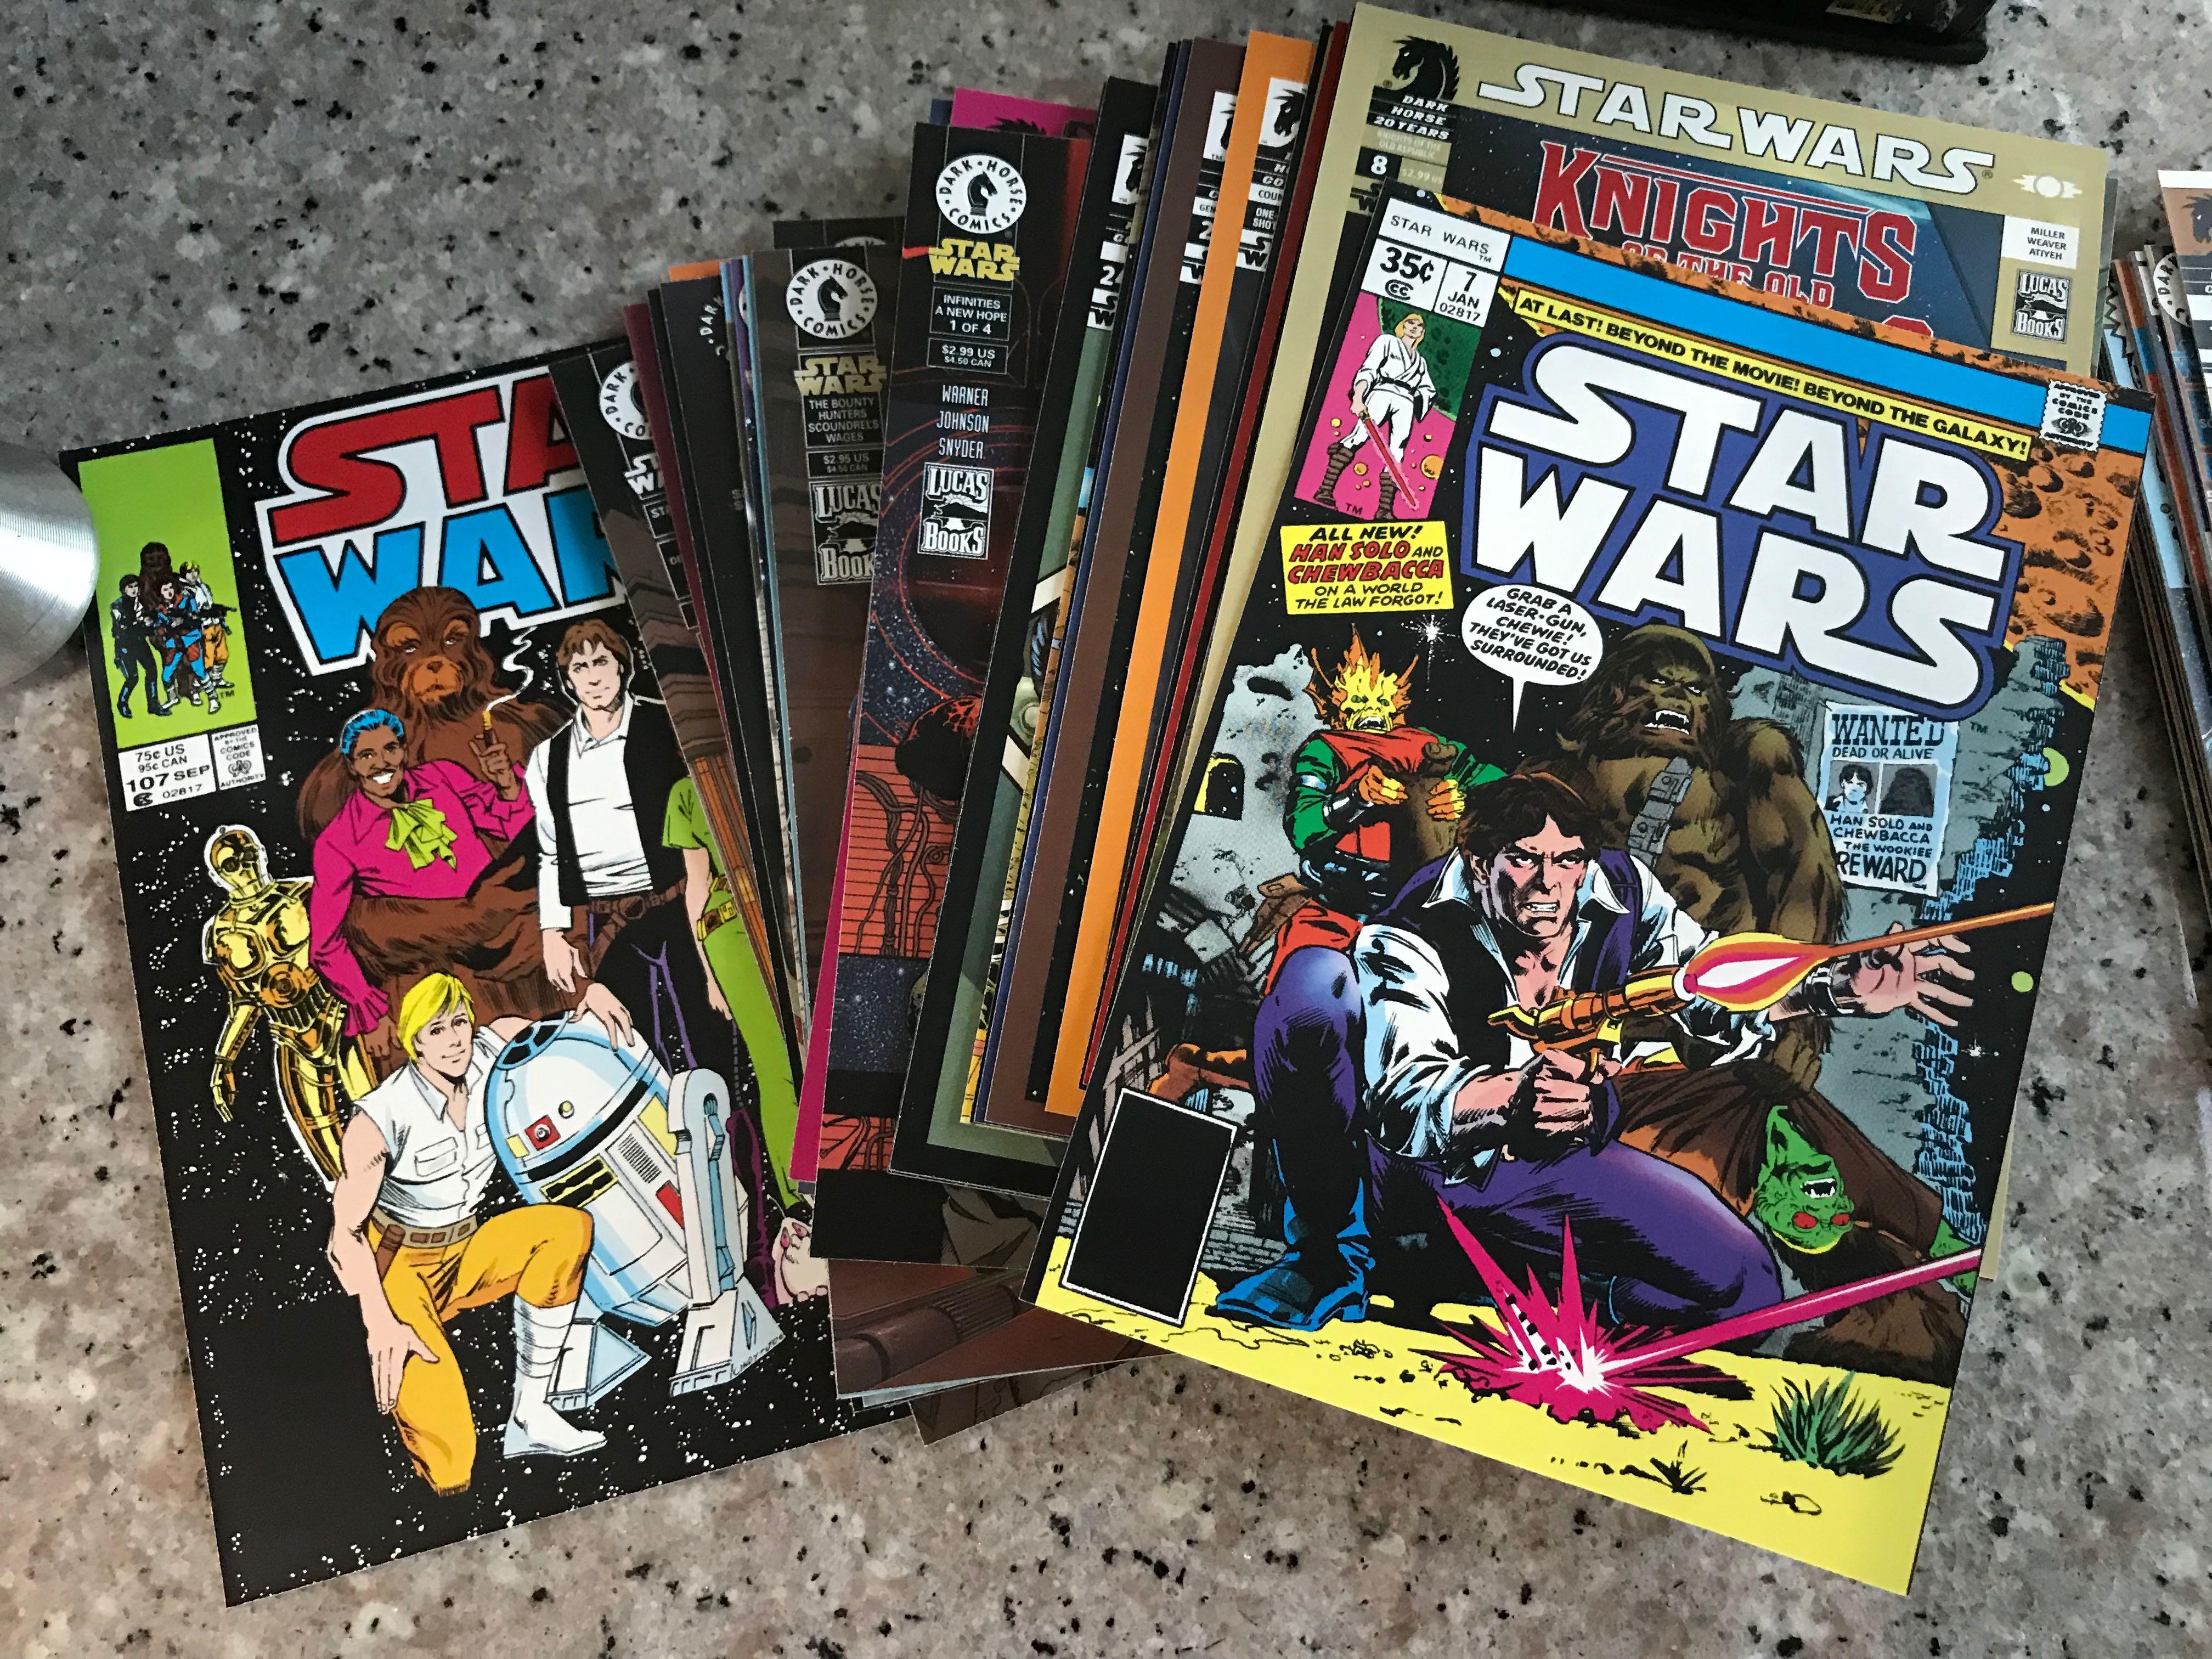 Memorabilia　Wars　Collectible　Postcards,　Hobbies　The　Collectibles,　Vintage　Art　Toys,　Carousell　Of　Comics　Star　100　Collectibles　on